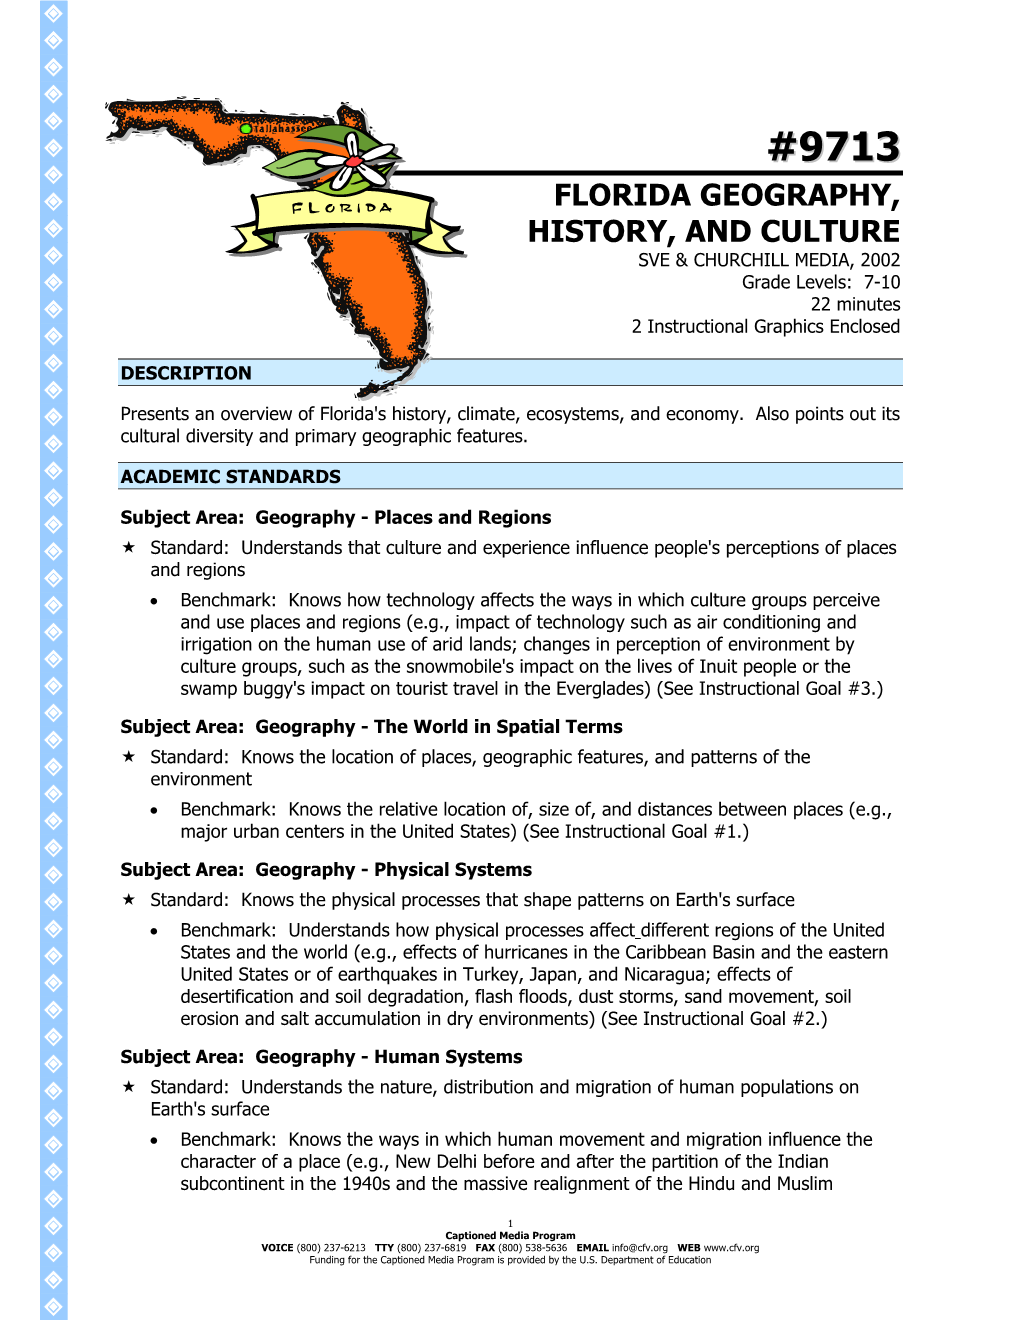 9713 FLORIDA GEOGRAPHY, HISTORY, and CULTURE Captioned Media Program